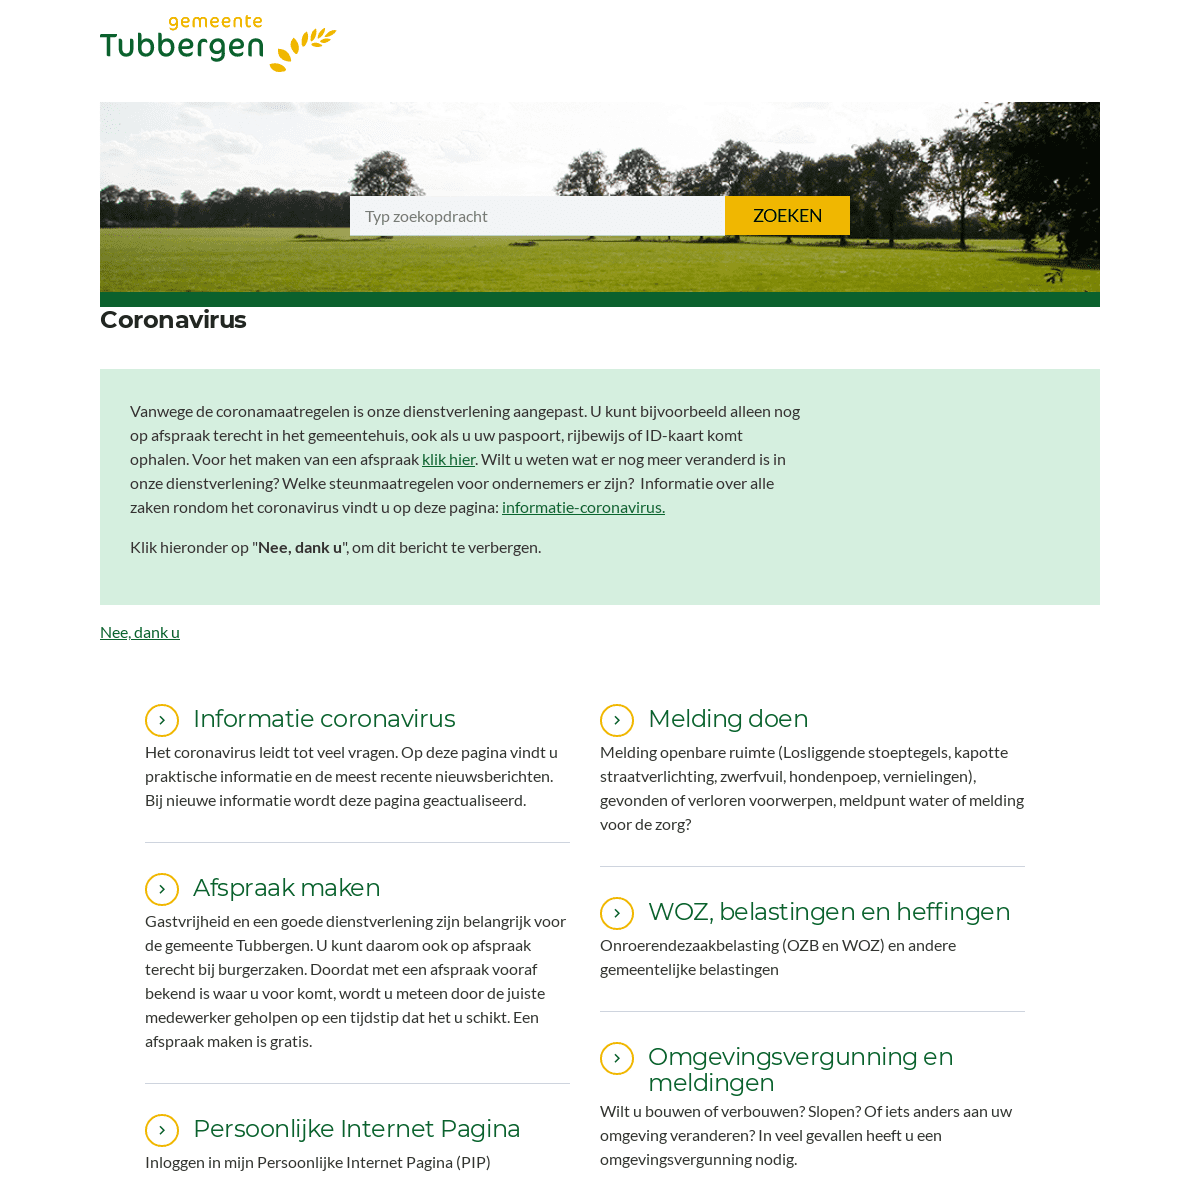 A complete backup of https://tubbergen.nl